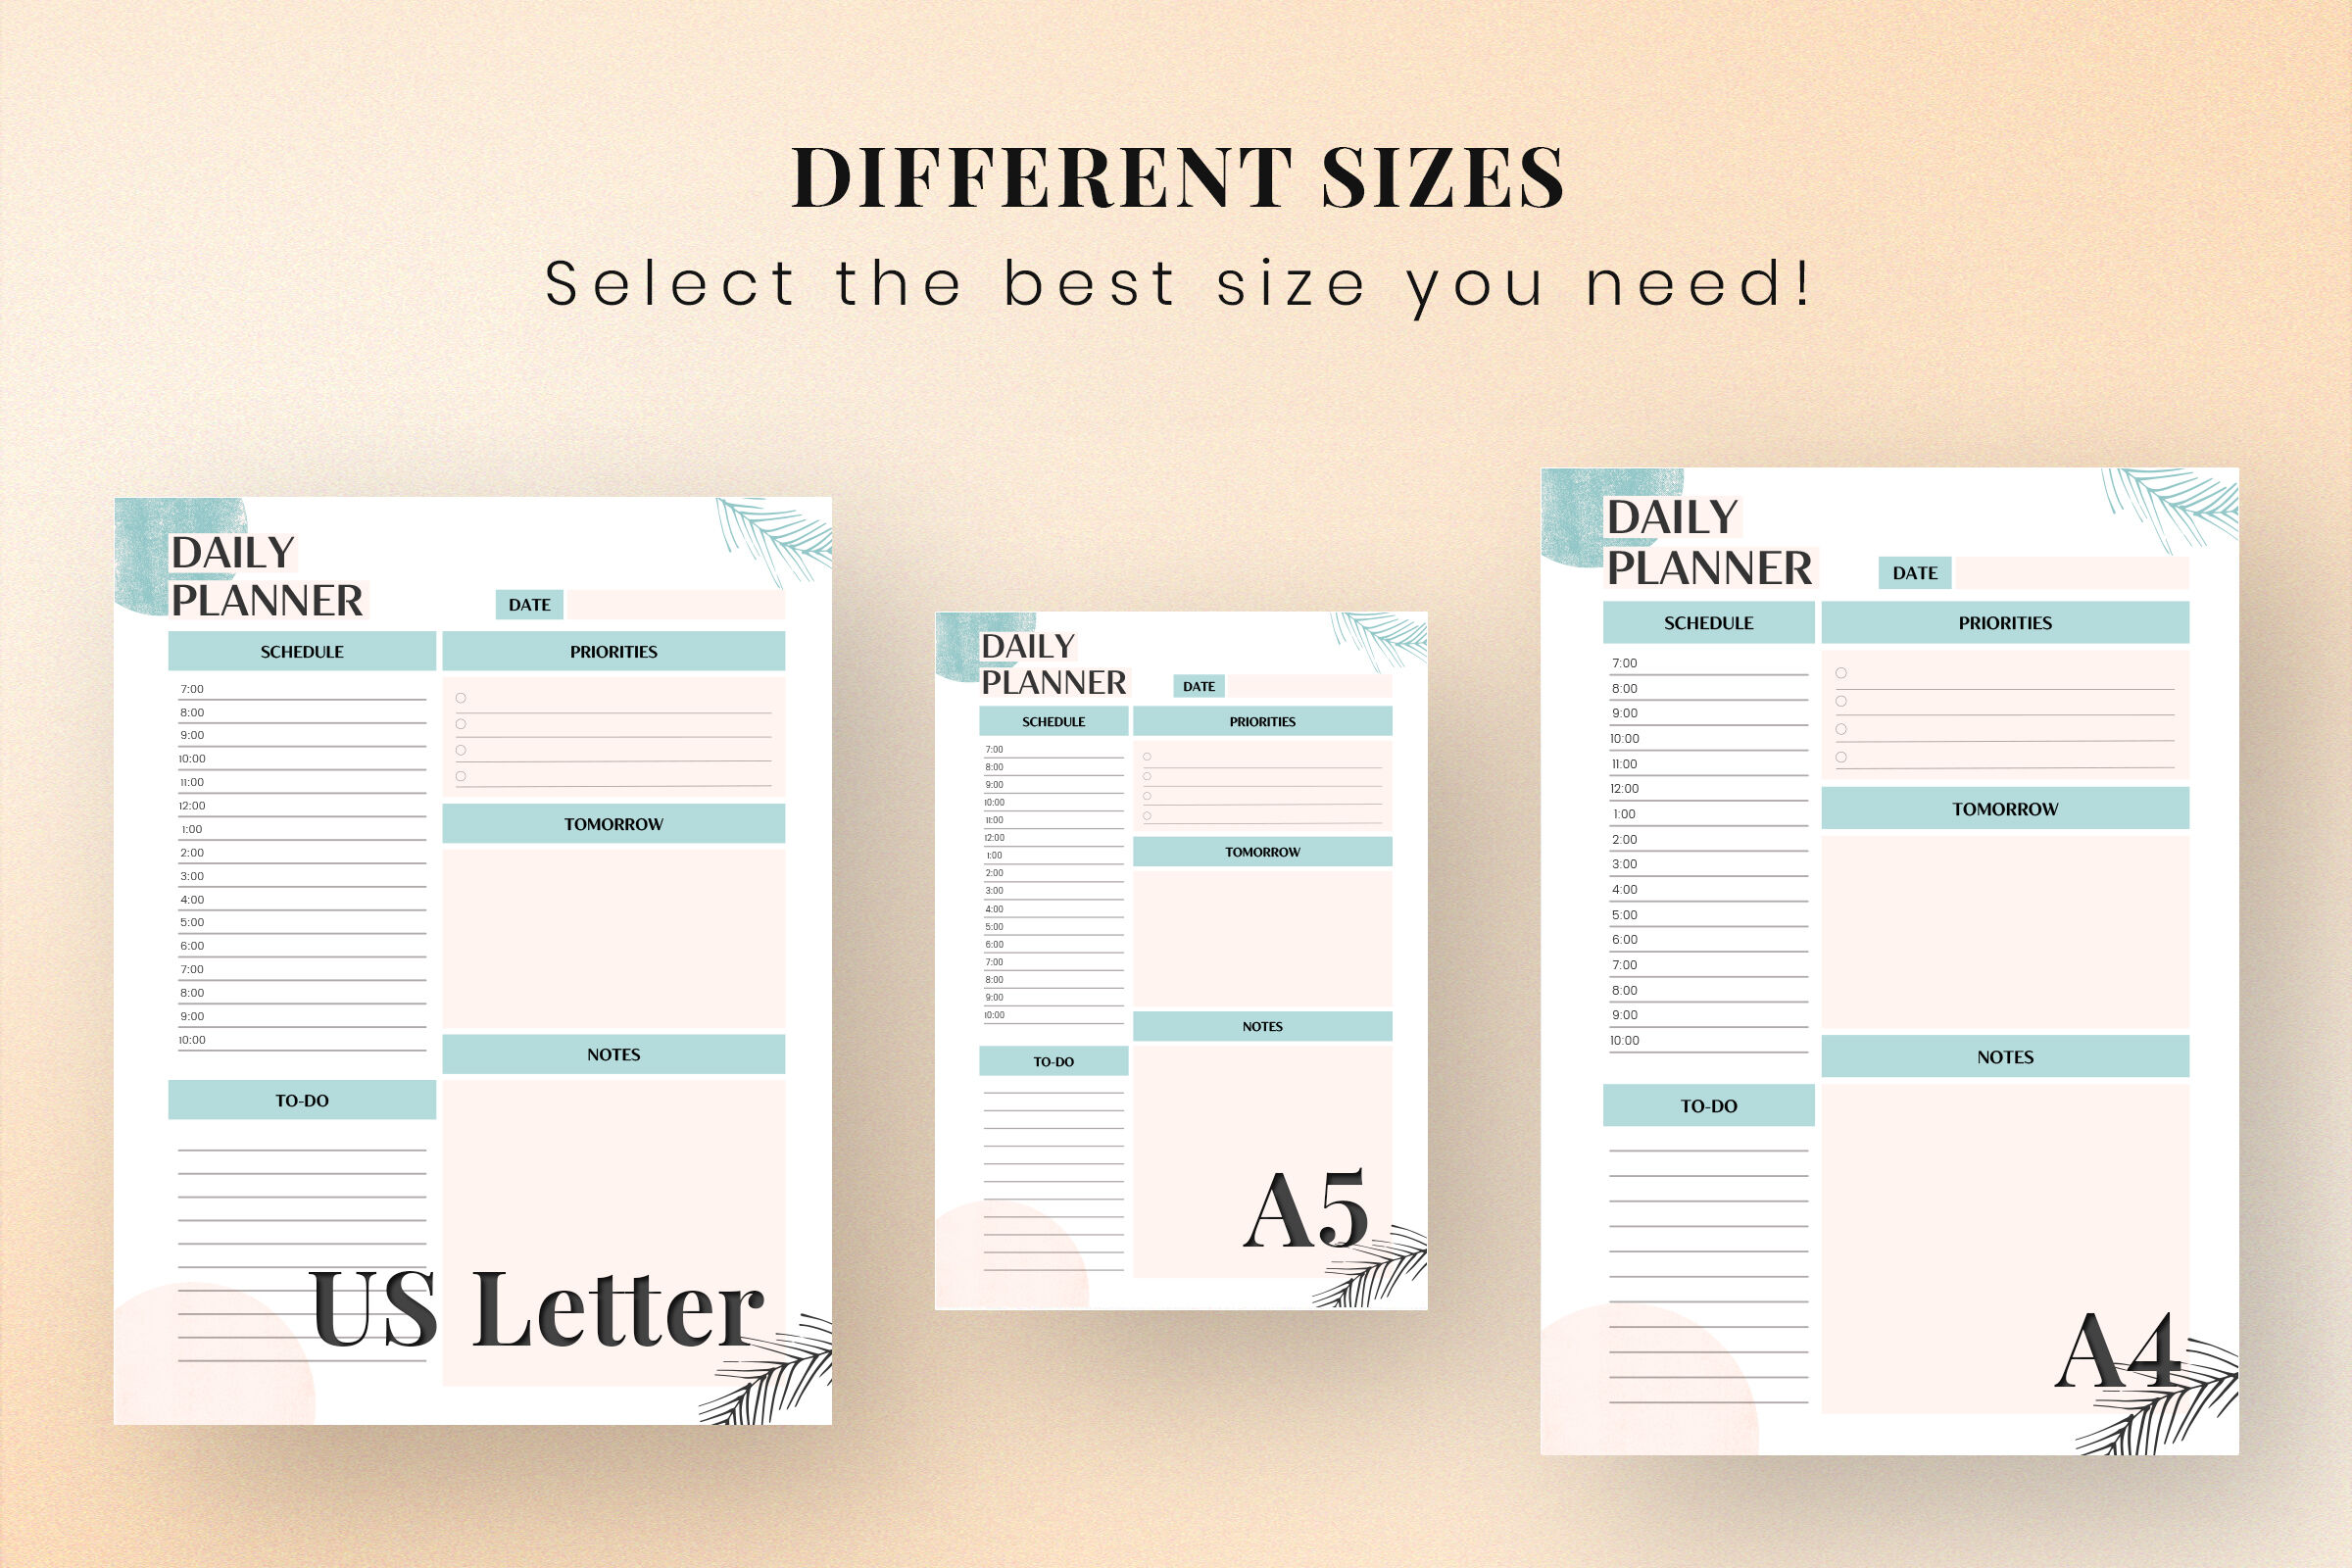 A4 and A5 One Page Weekly Planner US Letter Size, SnapyBiz